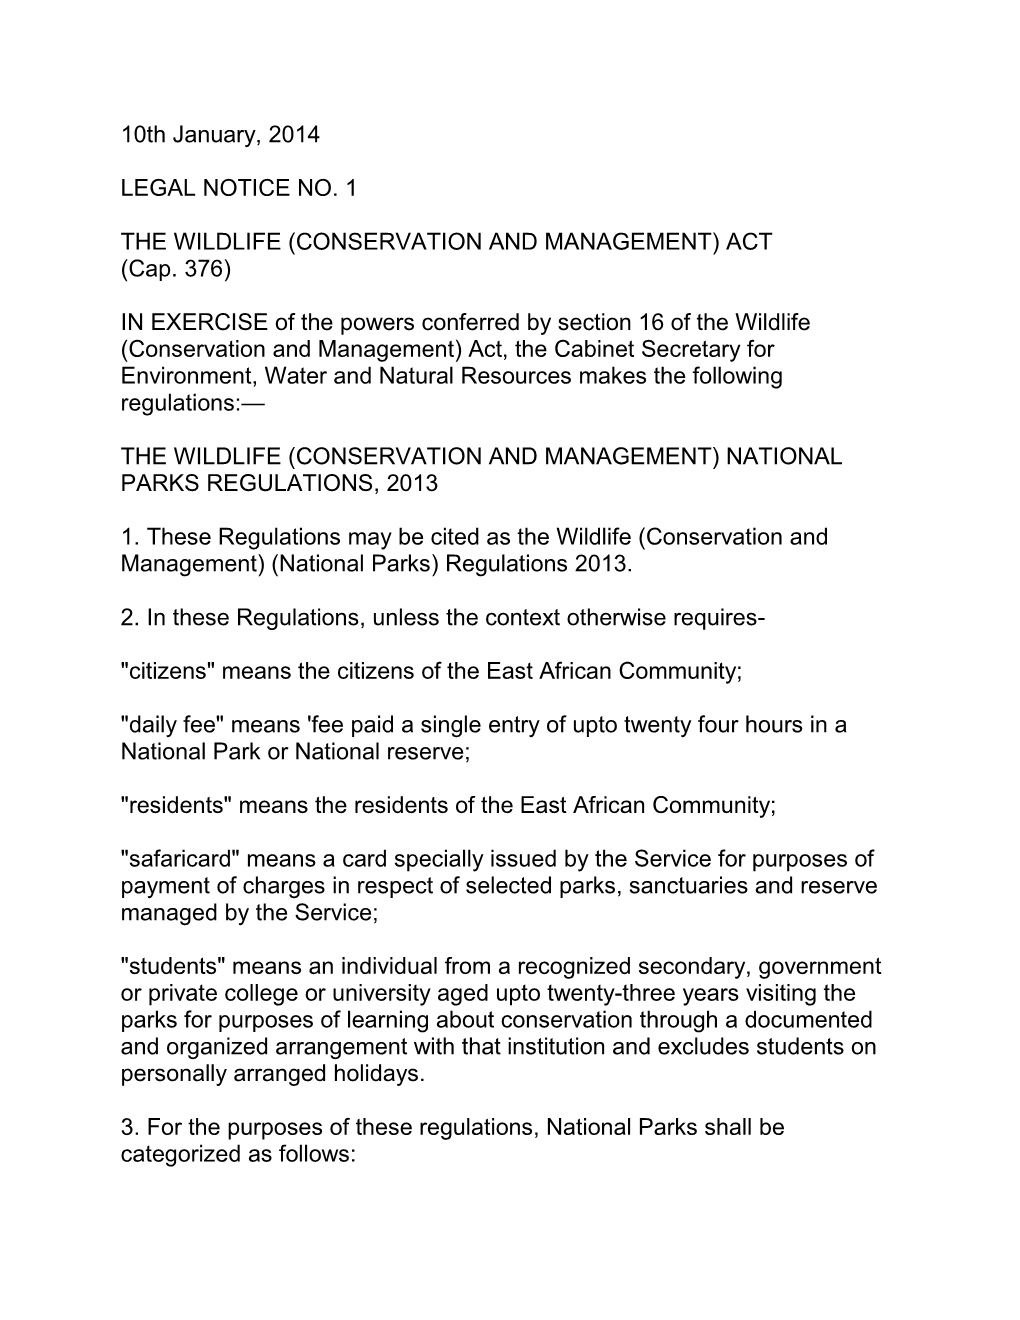 10Th January, 2014 LEGAL NOTICE NO. 1 the WILDLIFE